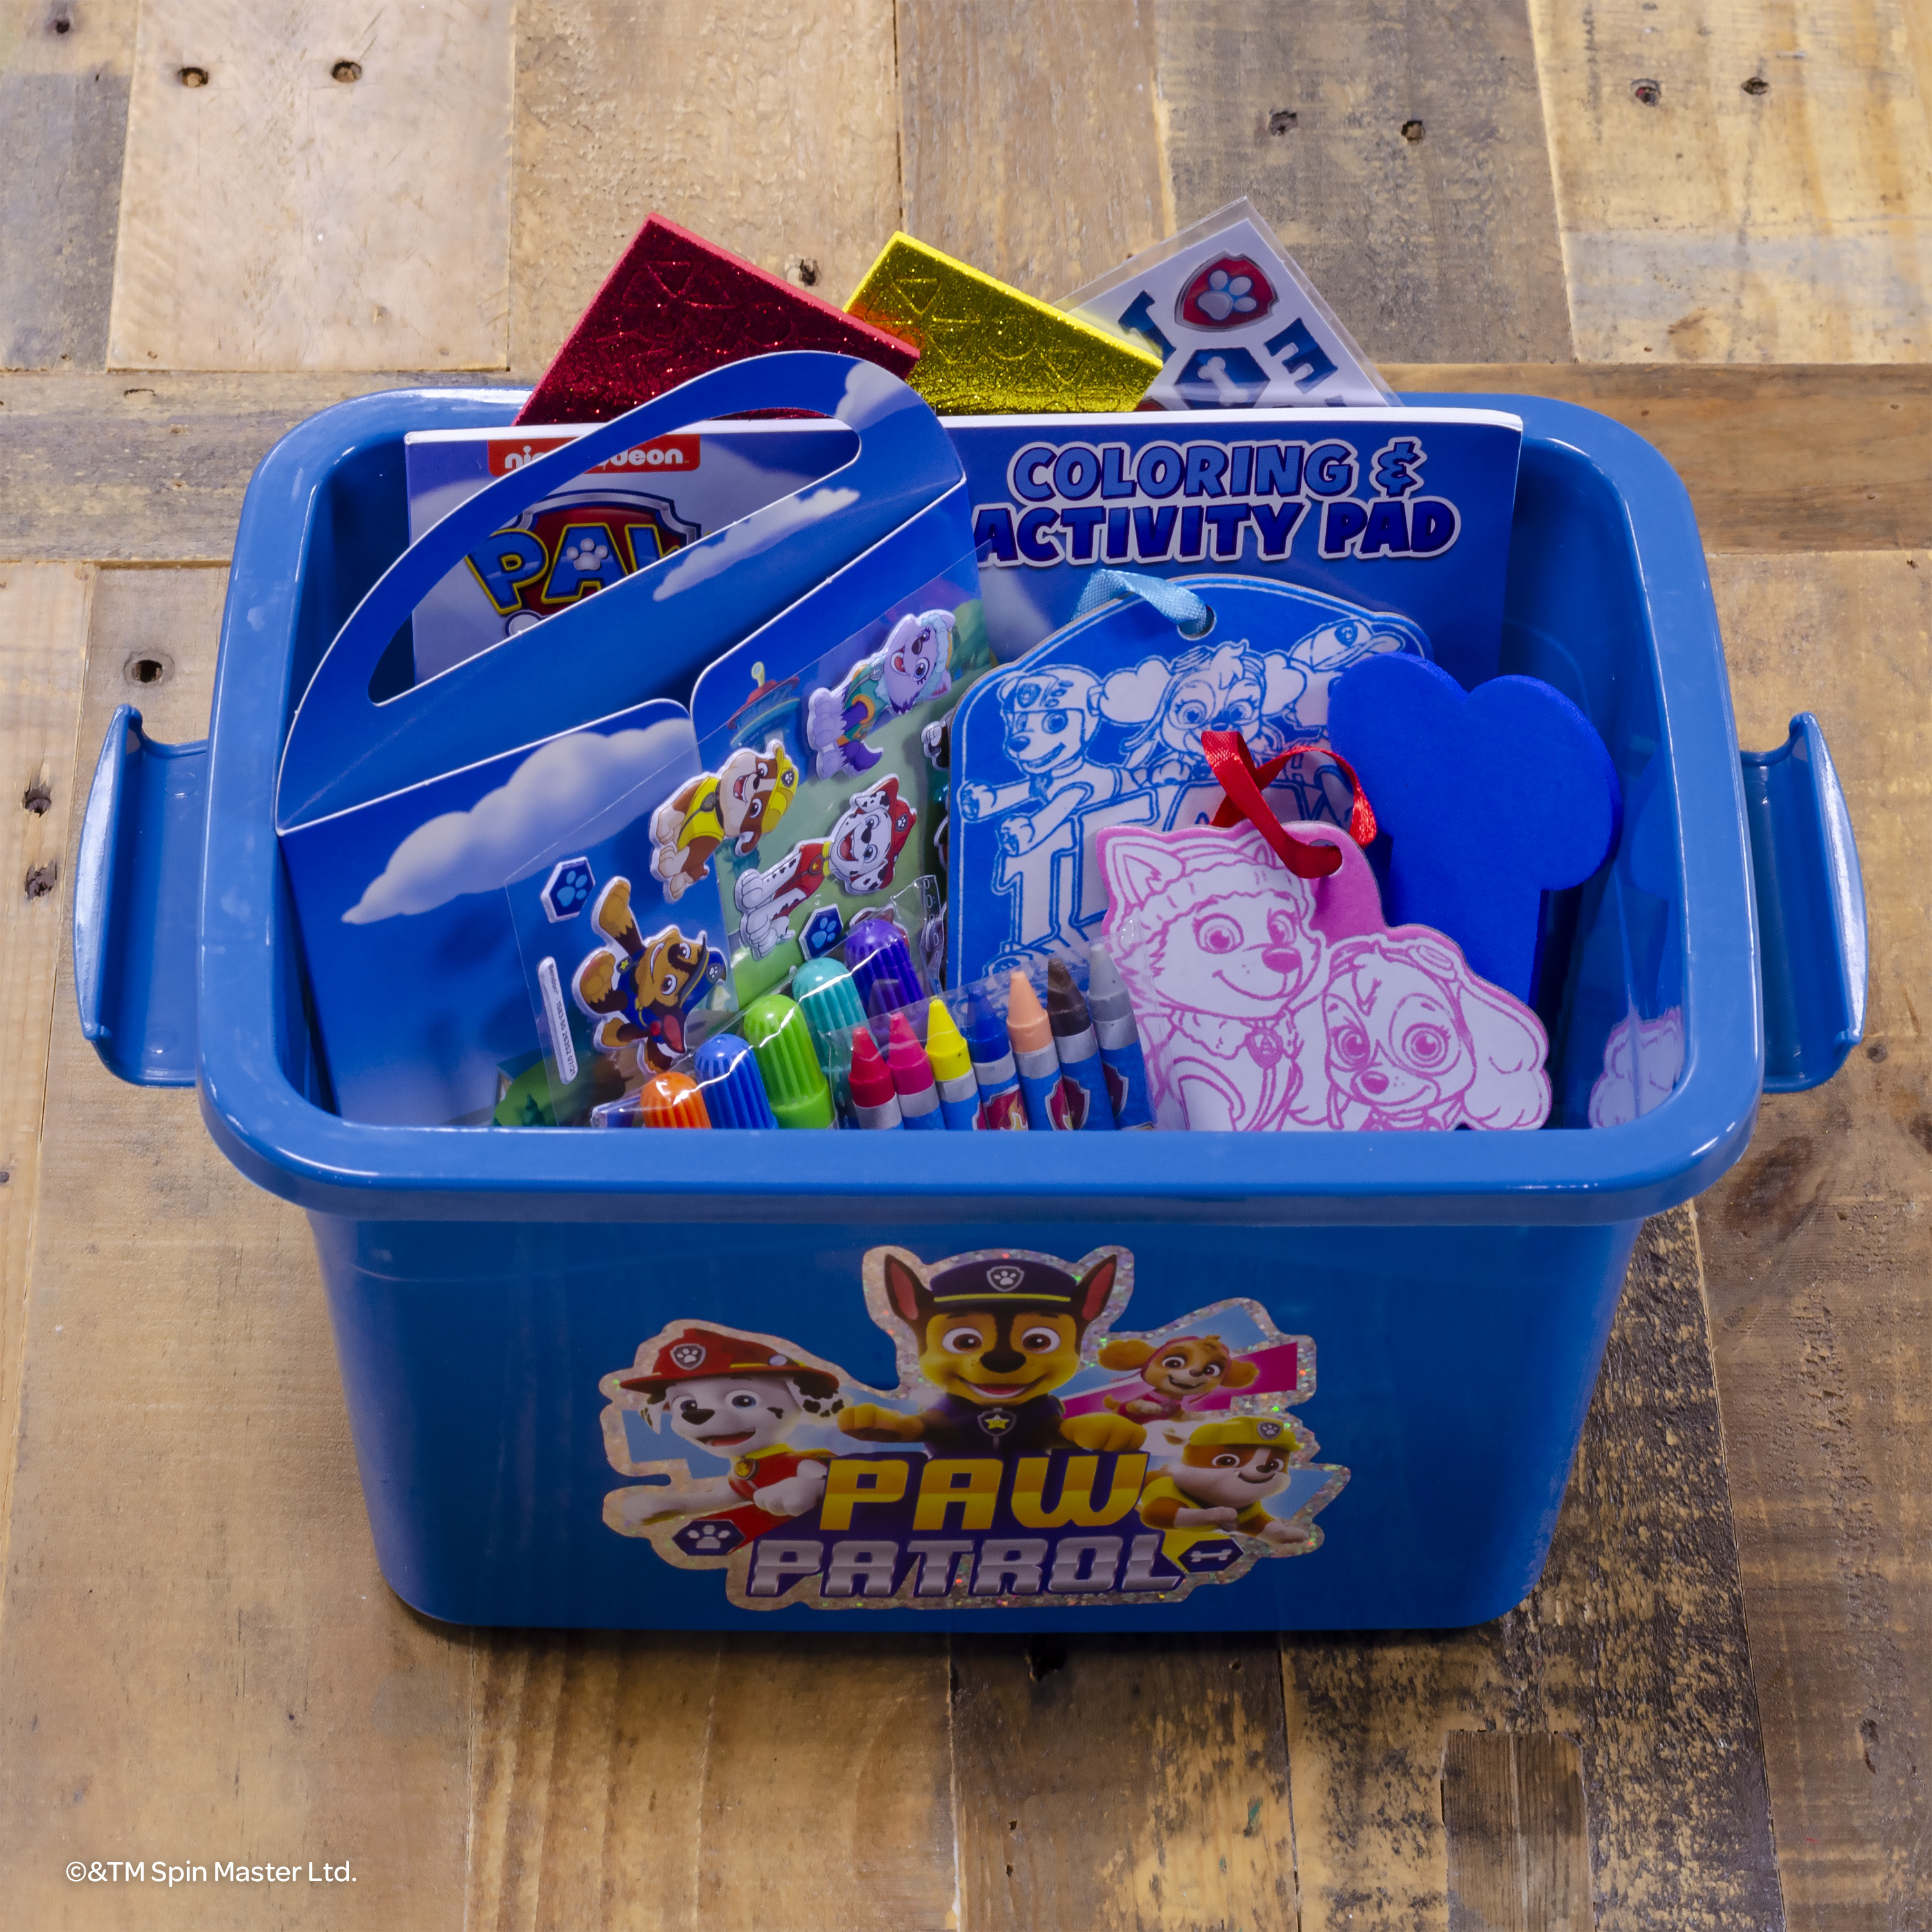 PAW Patrol Art Tub with a Coloring Book and Coloring Supplies - image 5 of 9